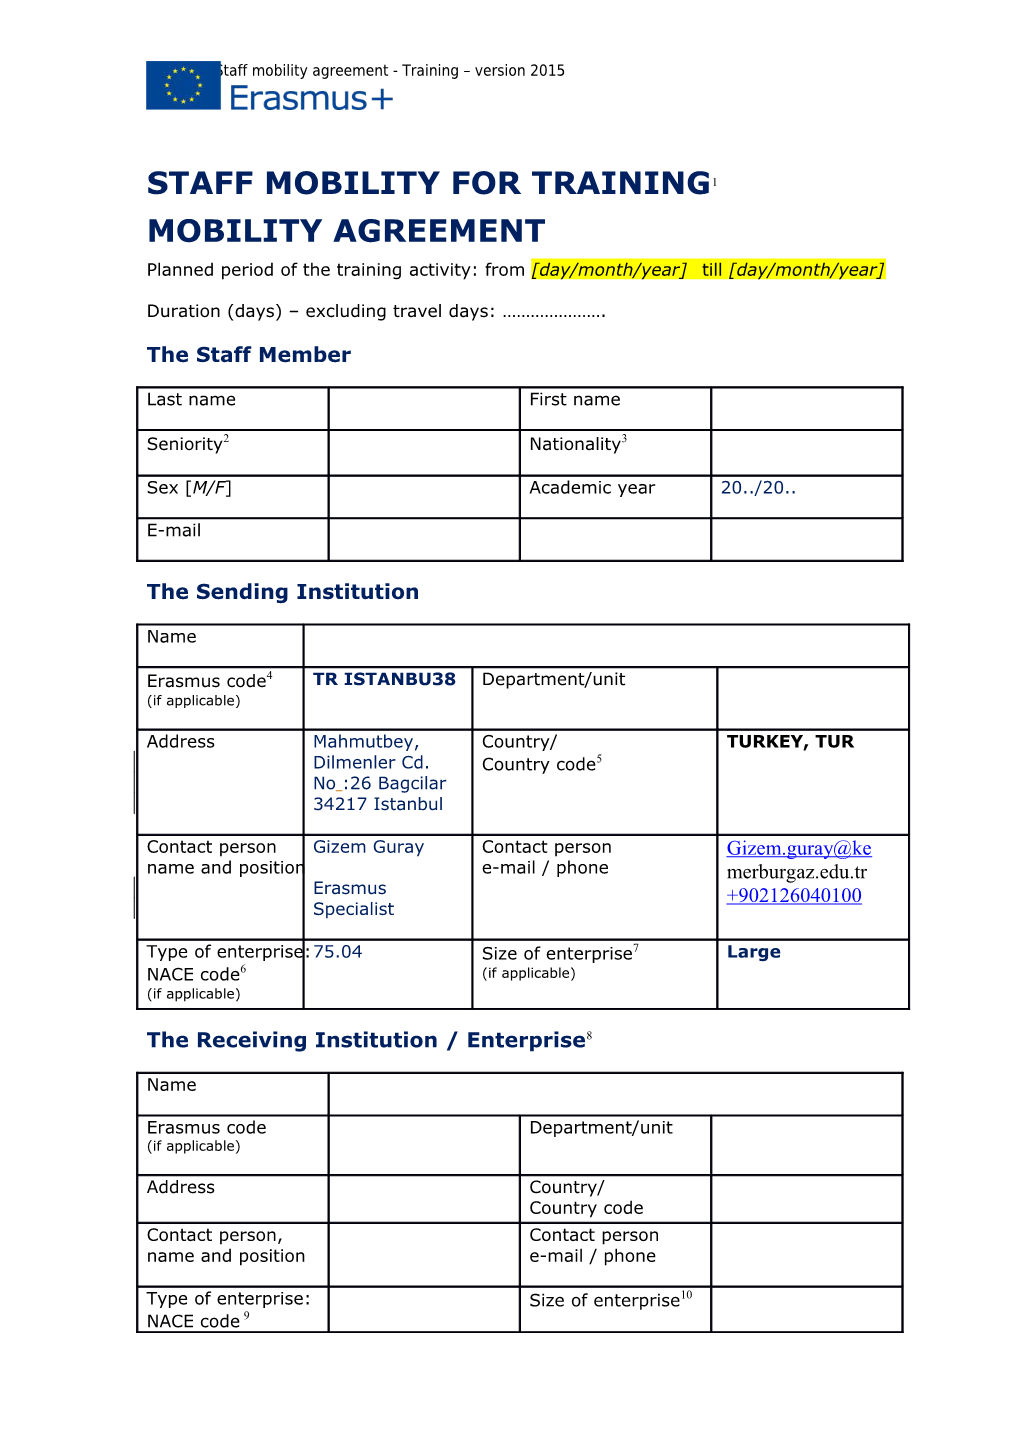 II.7 - HE - Staff Mobility Agreement - Training Version 2015